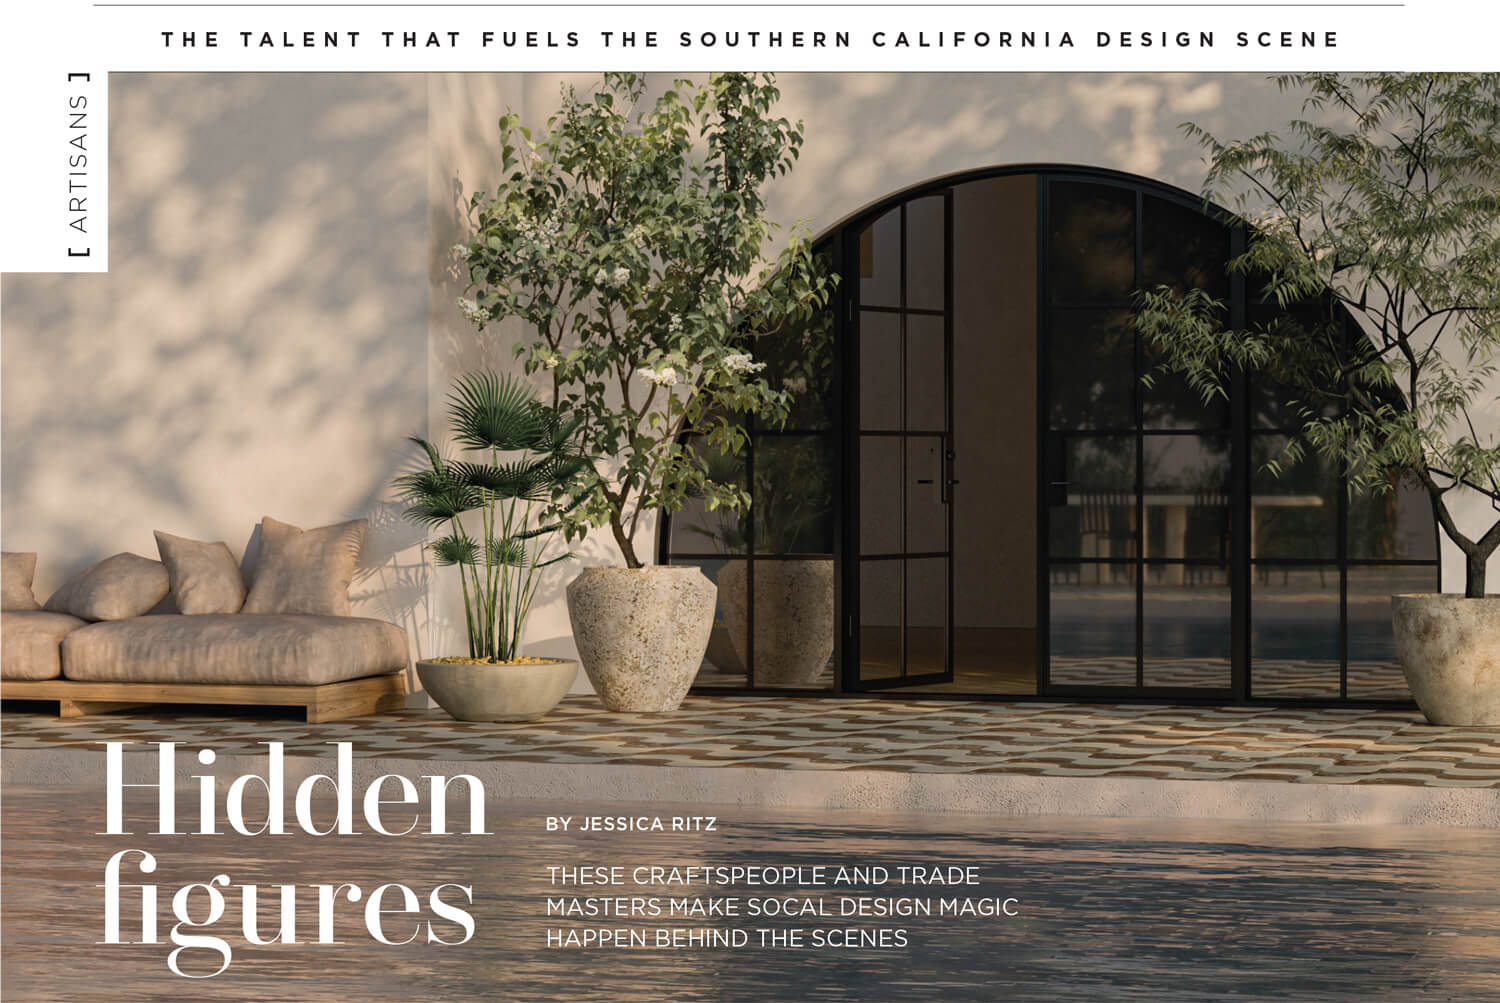 The Talent that Fuels the Southern California Design Scene - Hidden Figures - By: Jessica Ritz -These Craftspeople are Trade Masters Make Social Design Magic happen Behind the Scenes